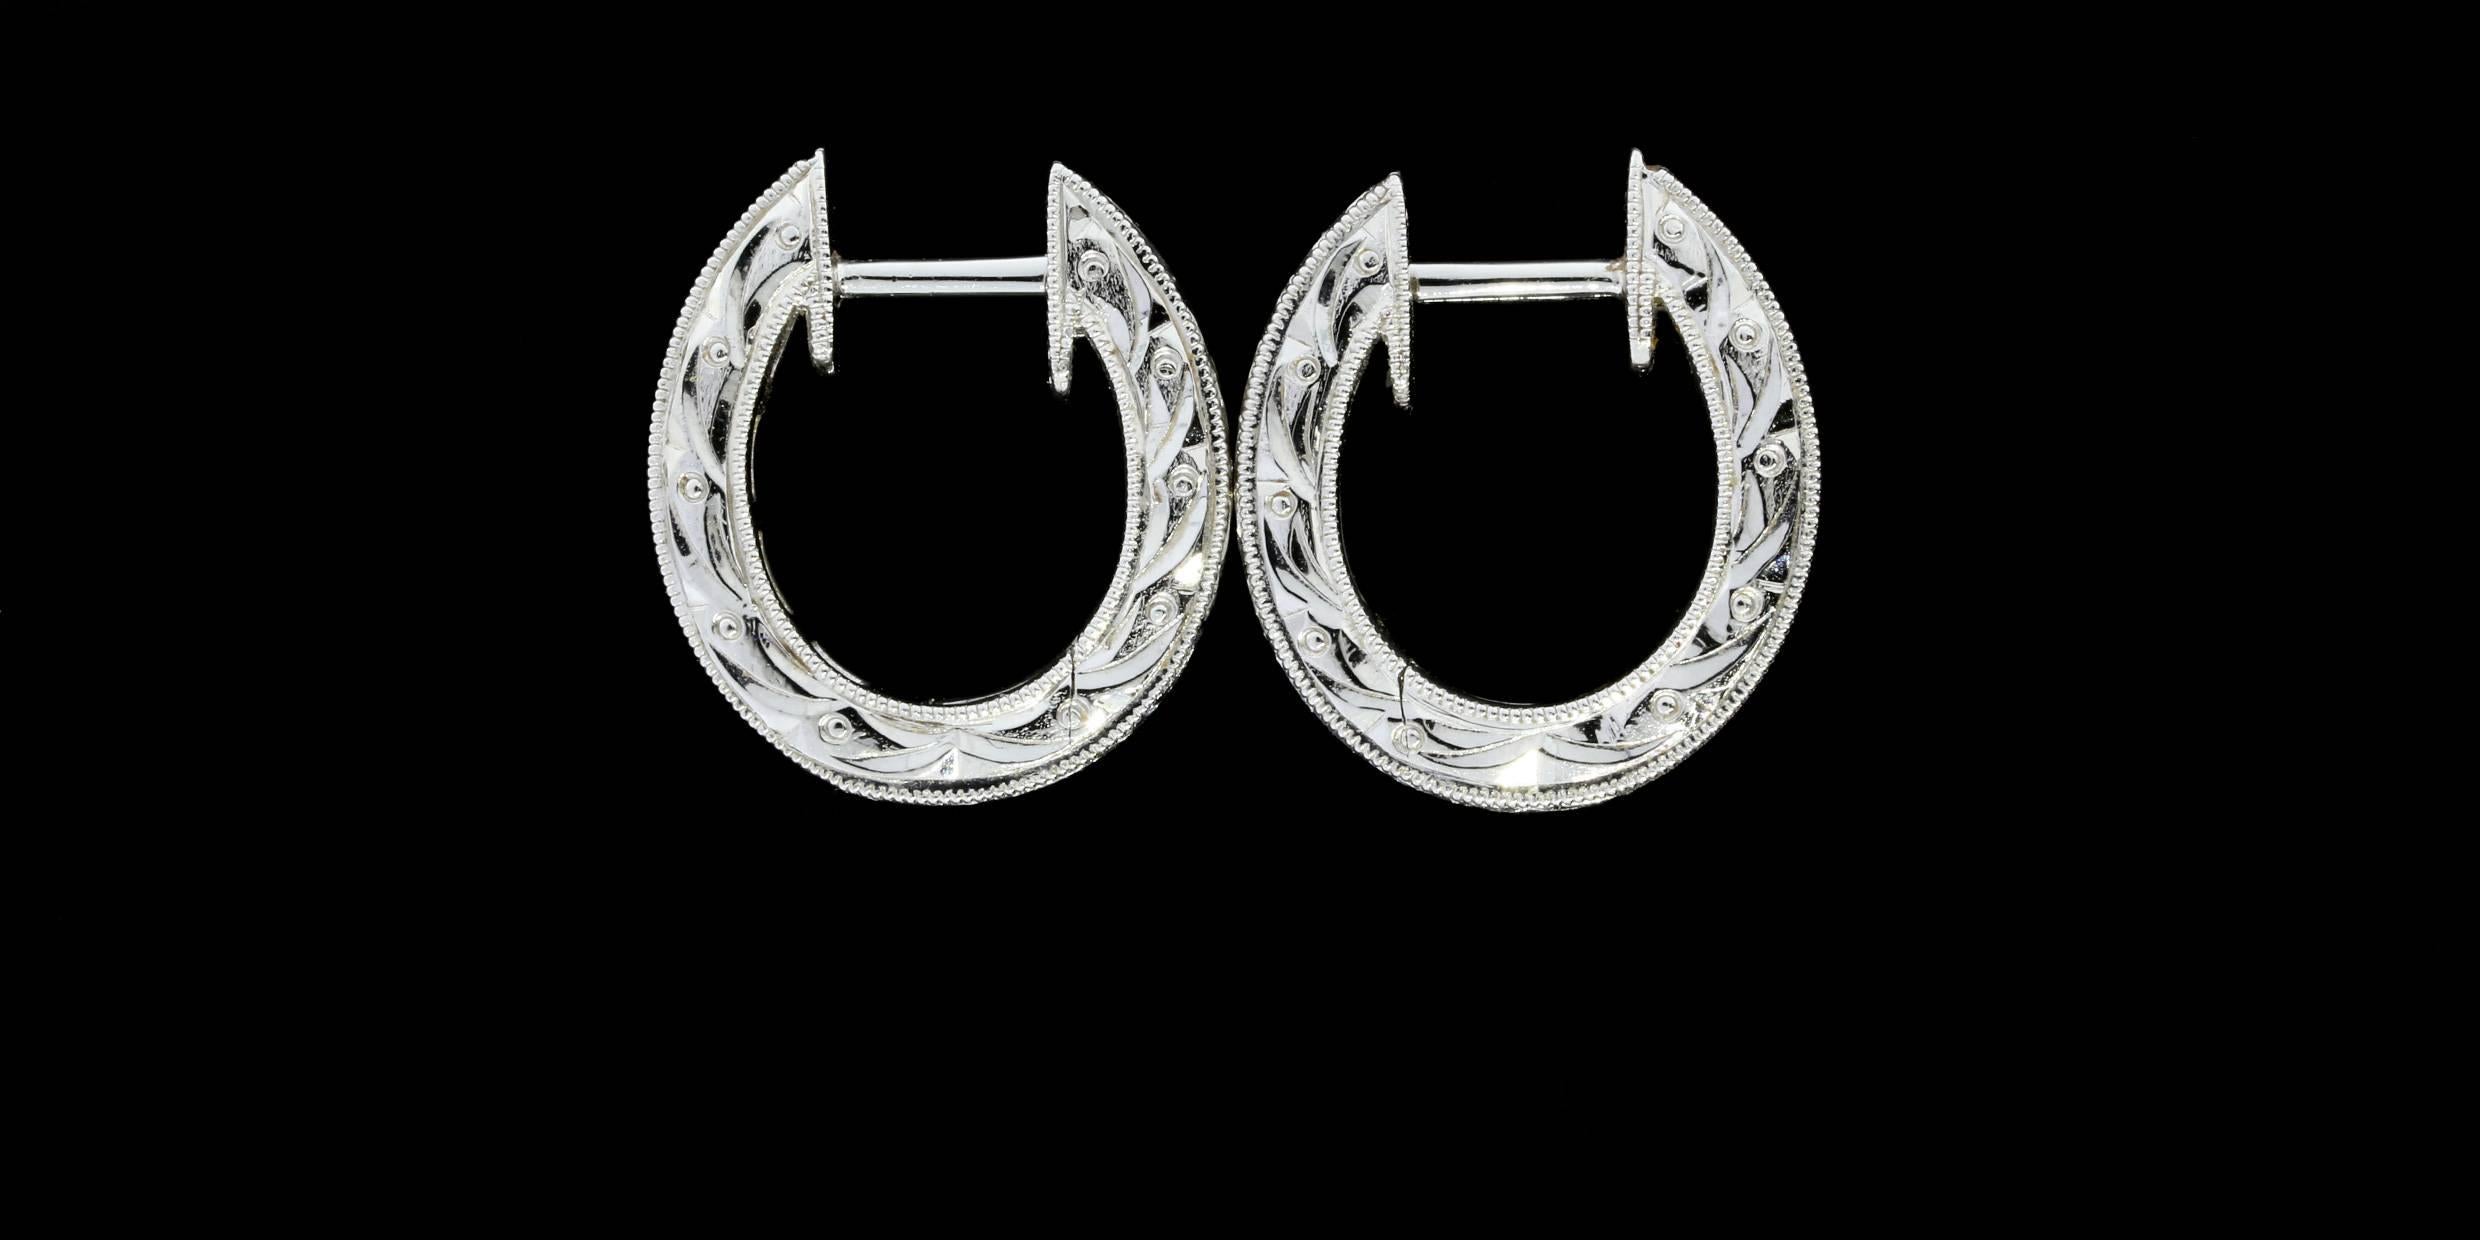 The earrings features 20 round brilliant cut diamonds weighing in total 0.50 carats. The diamonds are G/SI1+ in quality. The diamonds are channel set in these gorgeous small huggie style hoops. The earrings are comprised of 18 karat white gold and